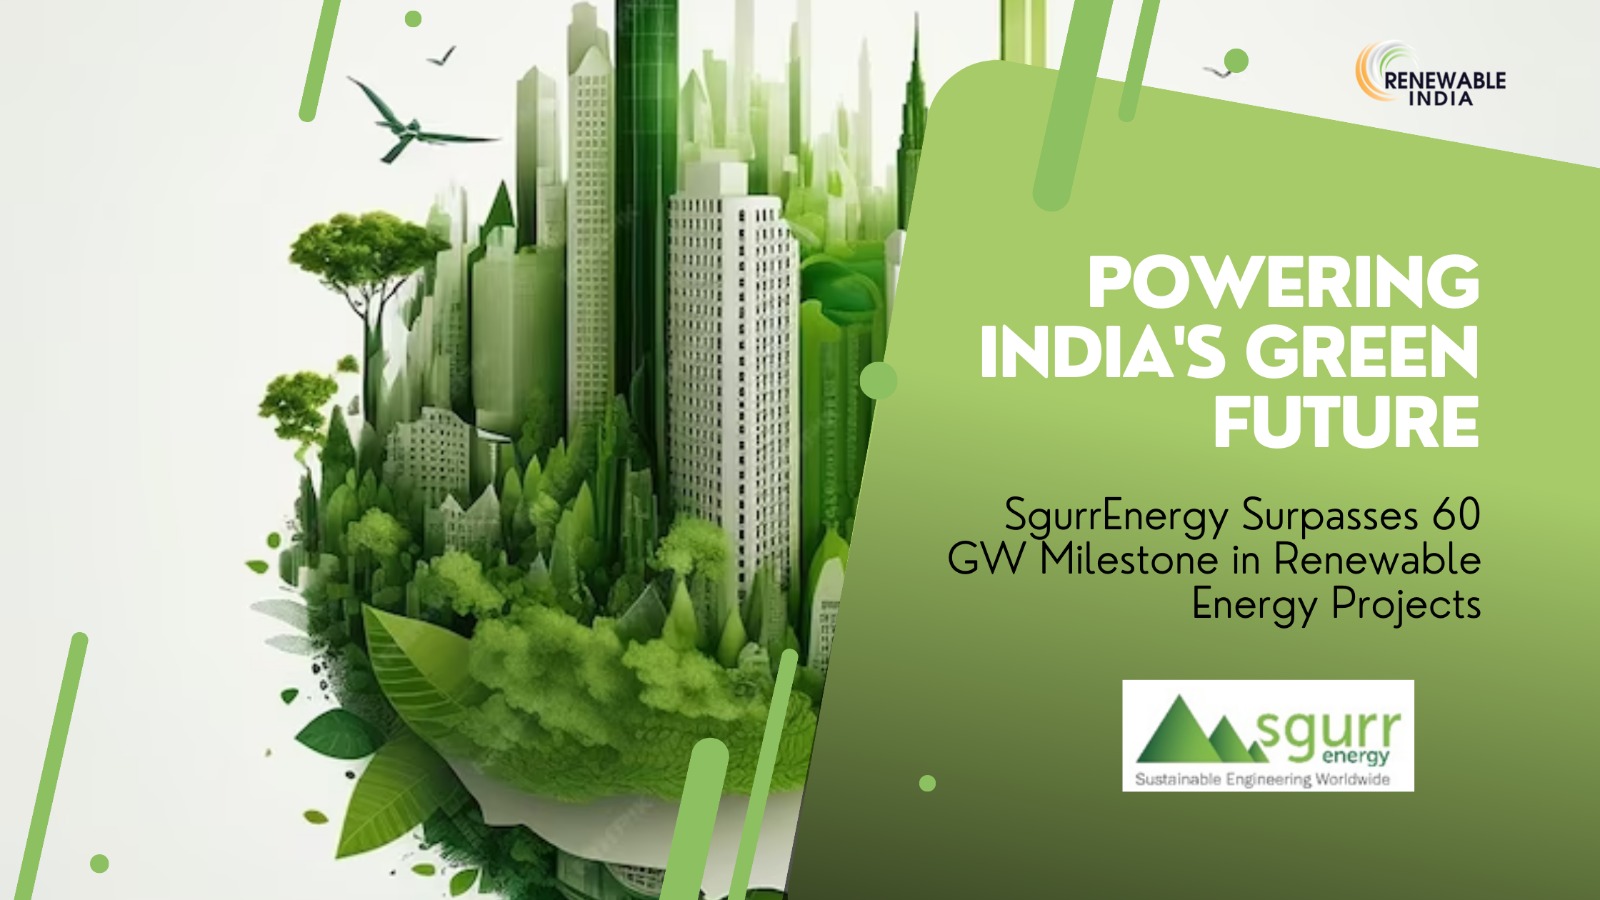 SgurrEnergy announces milestone of 60 GW~ renewable energy experience from Indian projects & 100GW+ globally